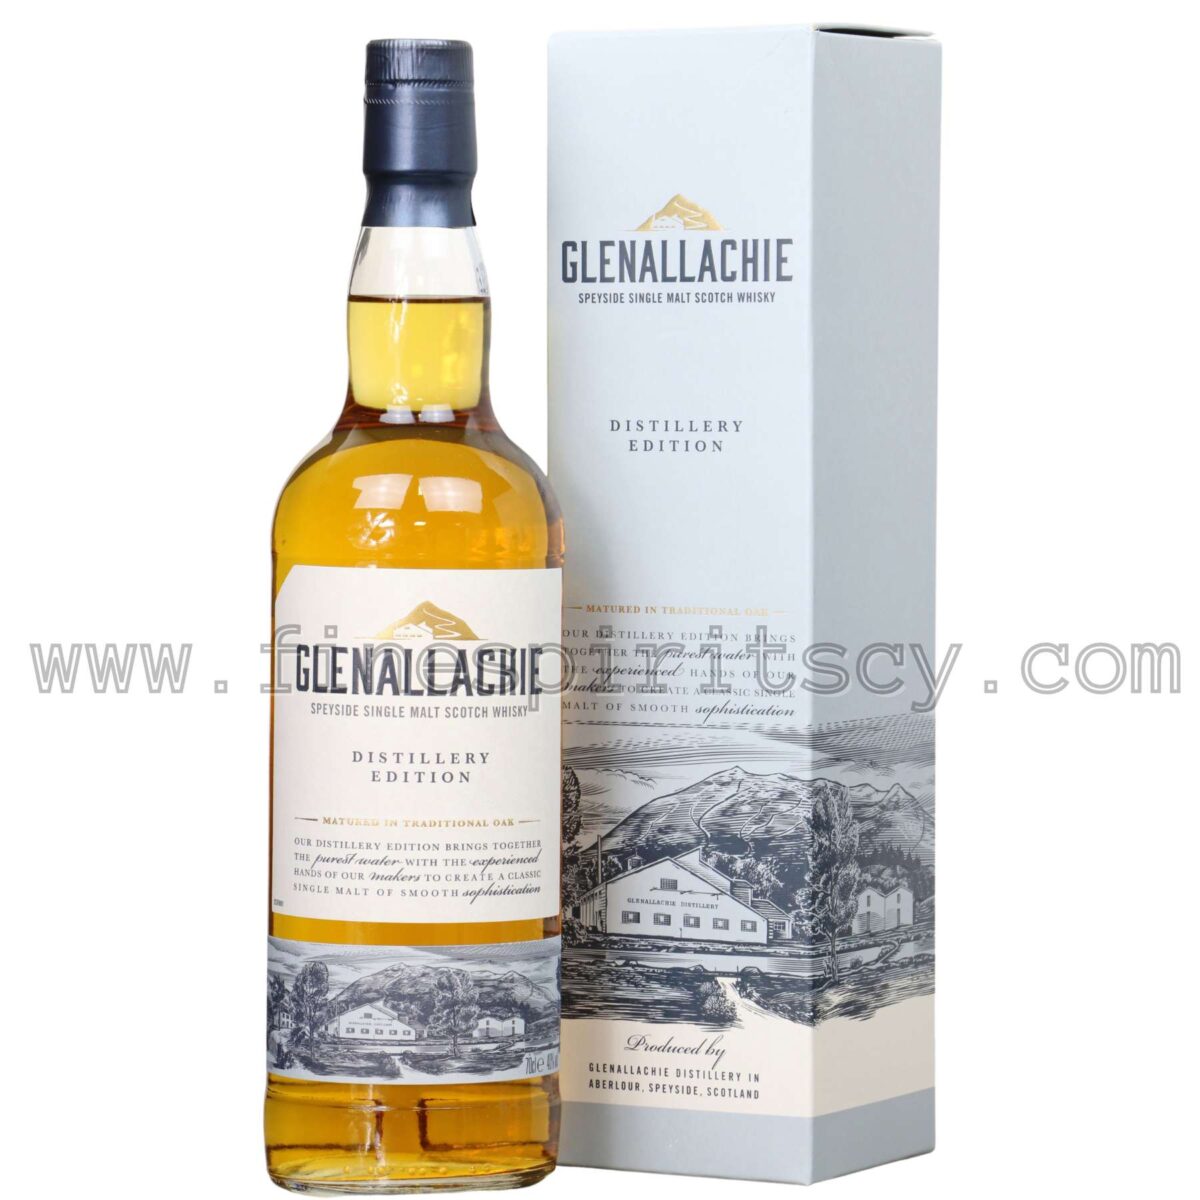 Glenallachie Distillery FS CY Edition Whisky Whiskey Online Order Shop Cyprus